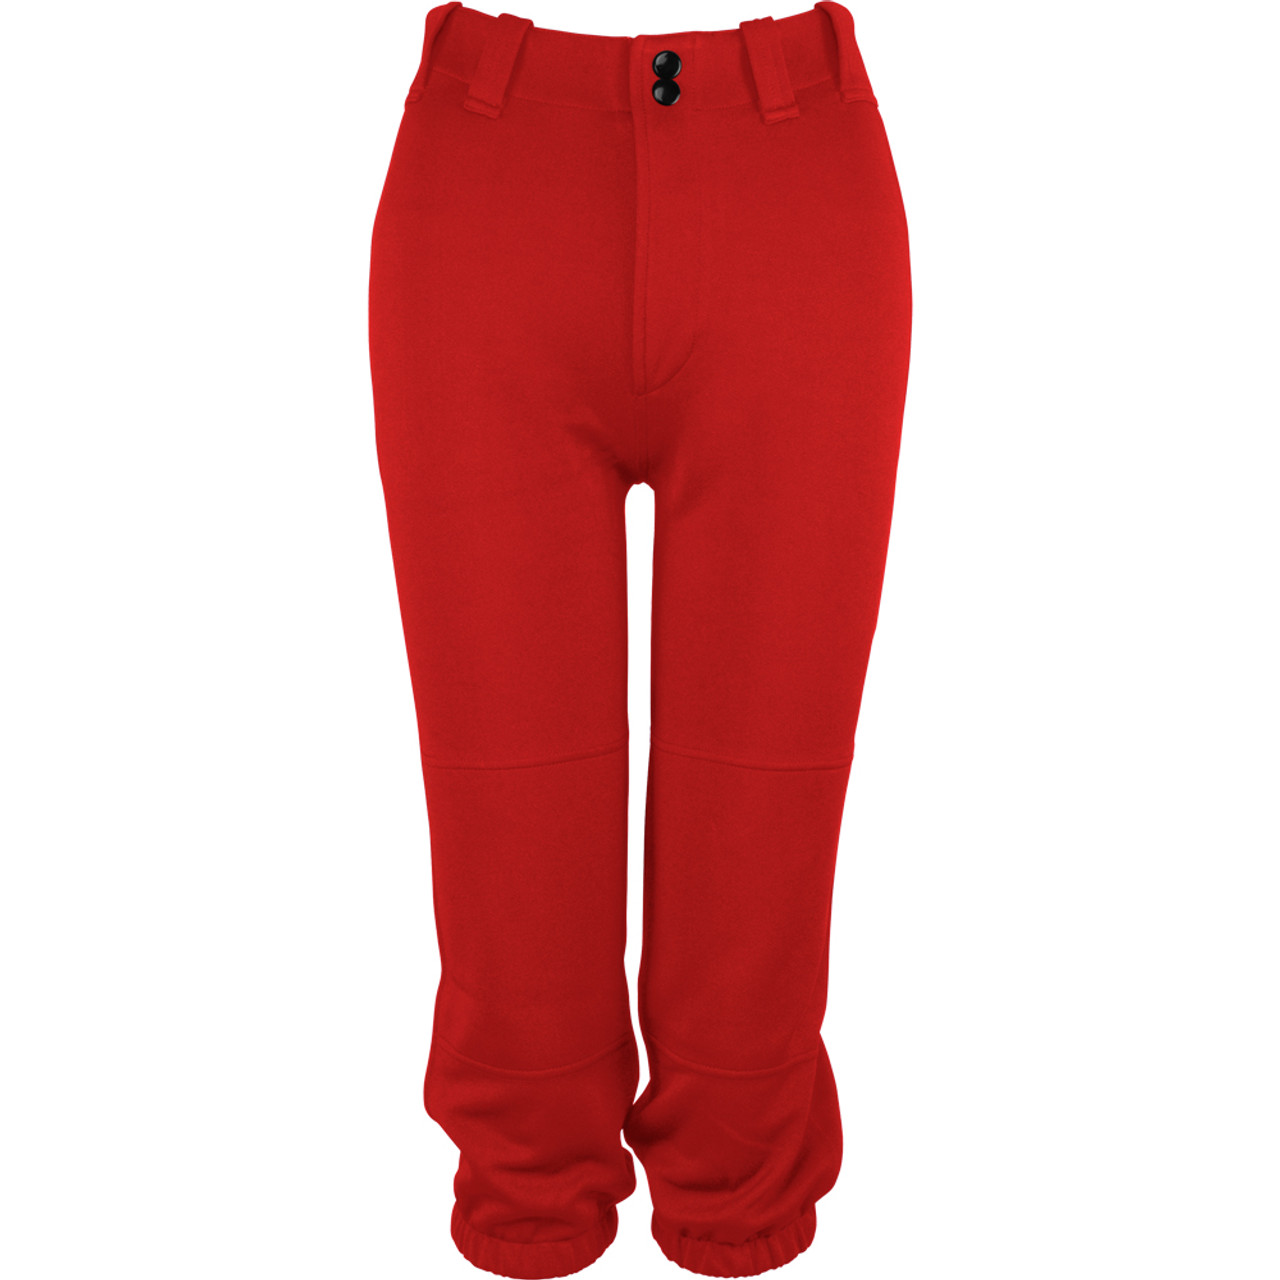 Marucci Double Knit Red Women's Fastpitch Softball Pants